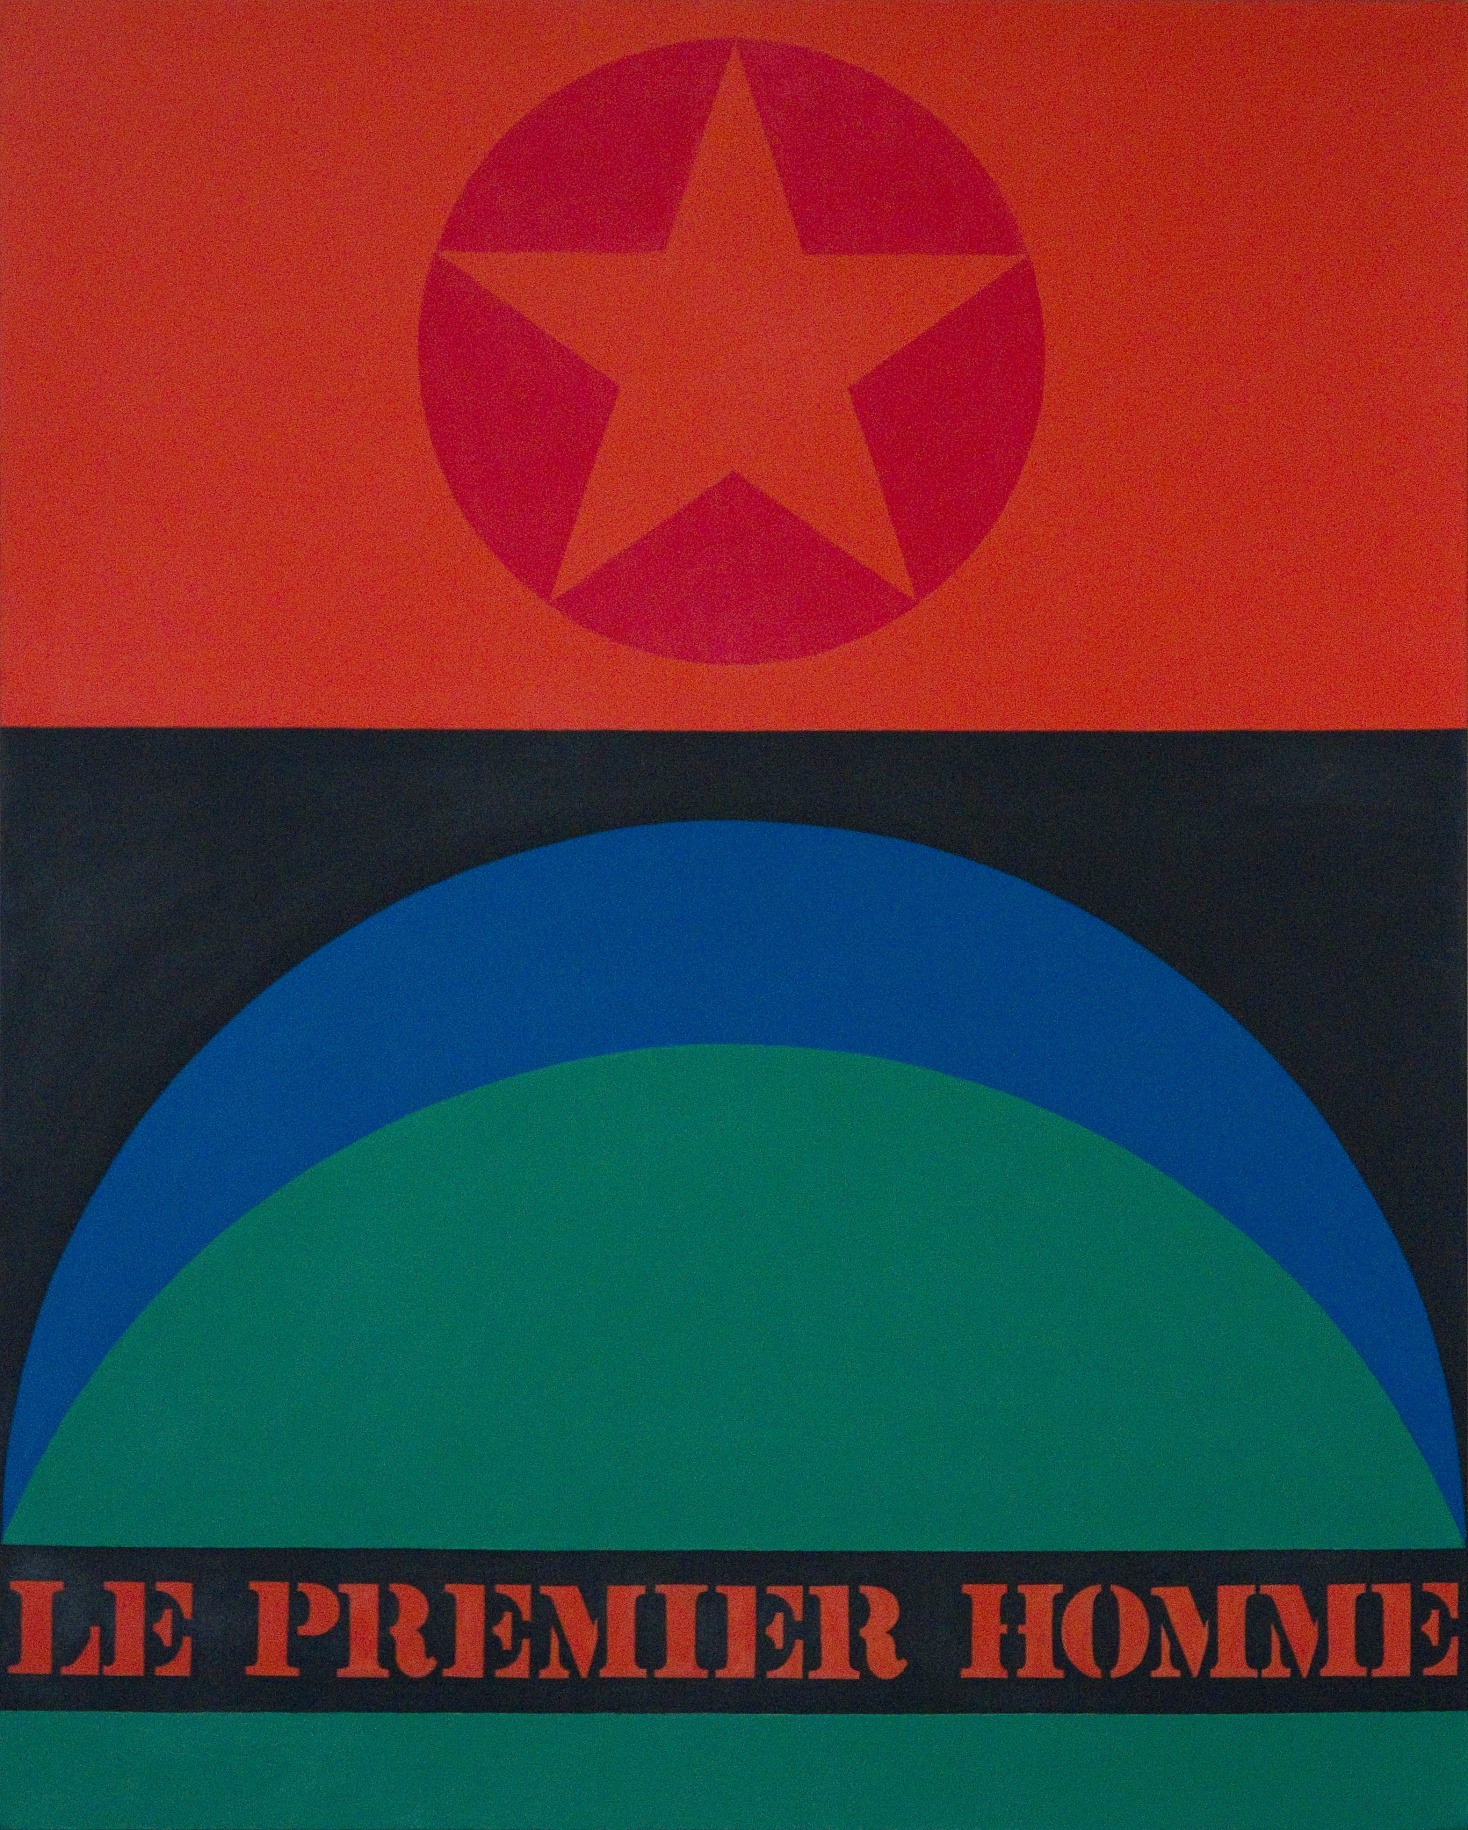 A 50 by 40 inch painting with a red field of color containing a red orb with a red star in the upper third of the canvas. Below are a blue and a green semicircle, and the painting's title, Le Premier Homme, in red stenciled letters